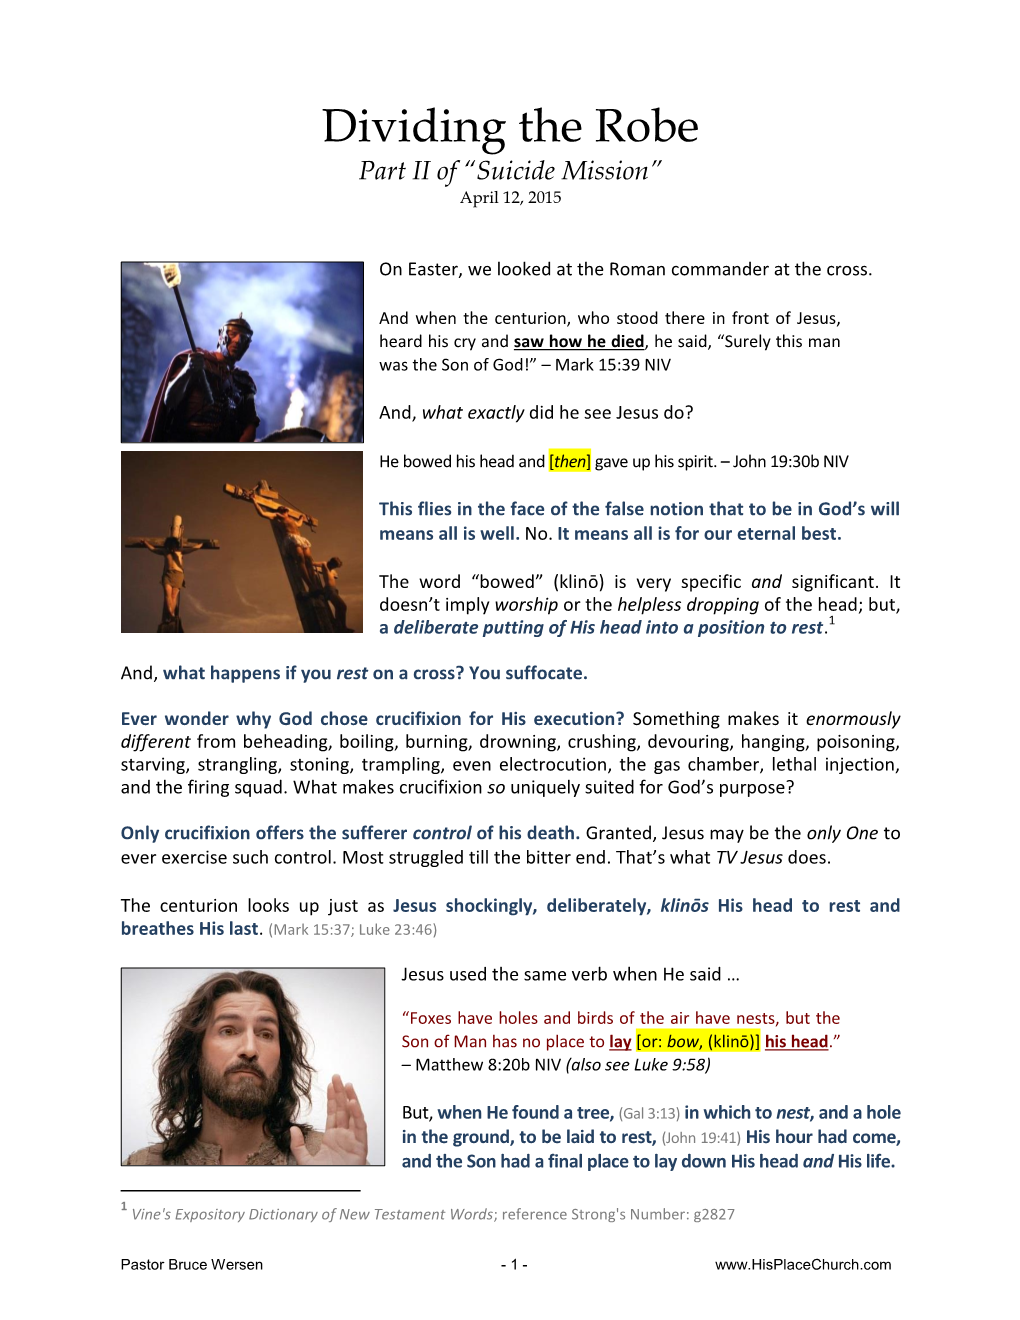 Dividing the Robe Part II of “Suicide Mission” April 12, 2015